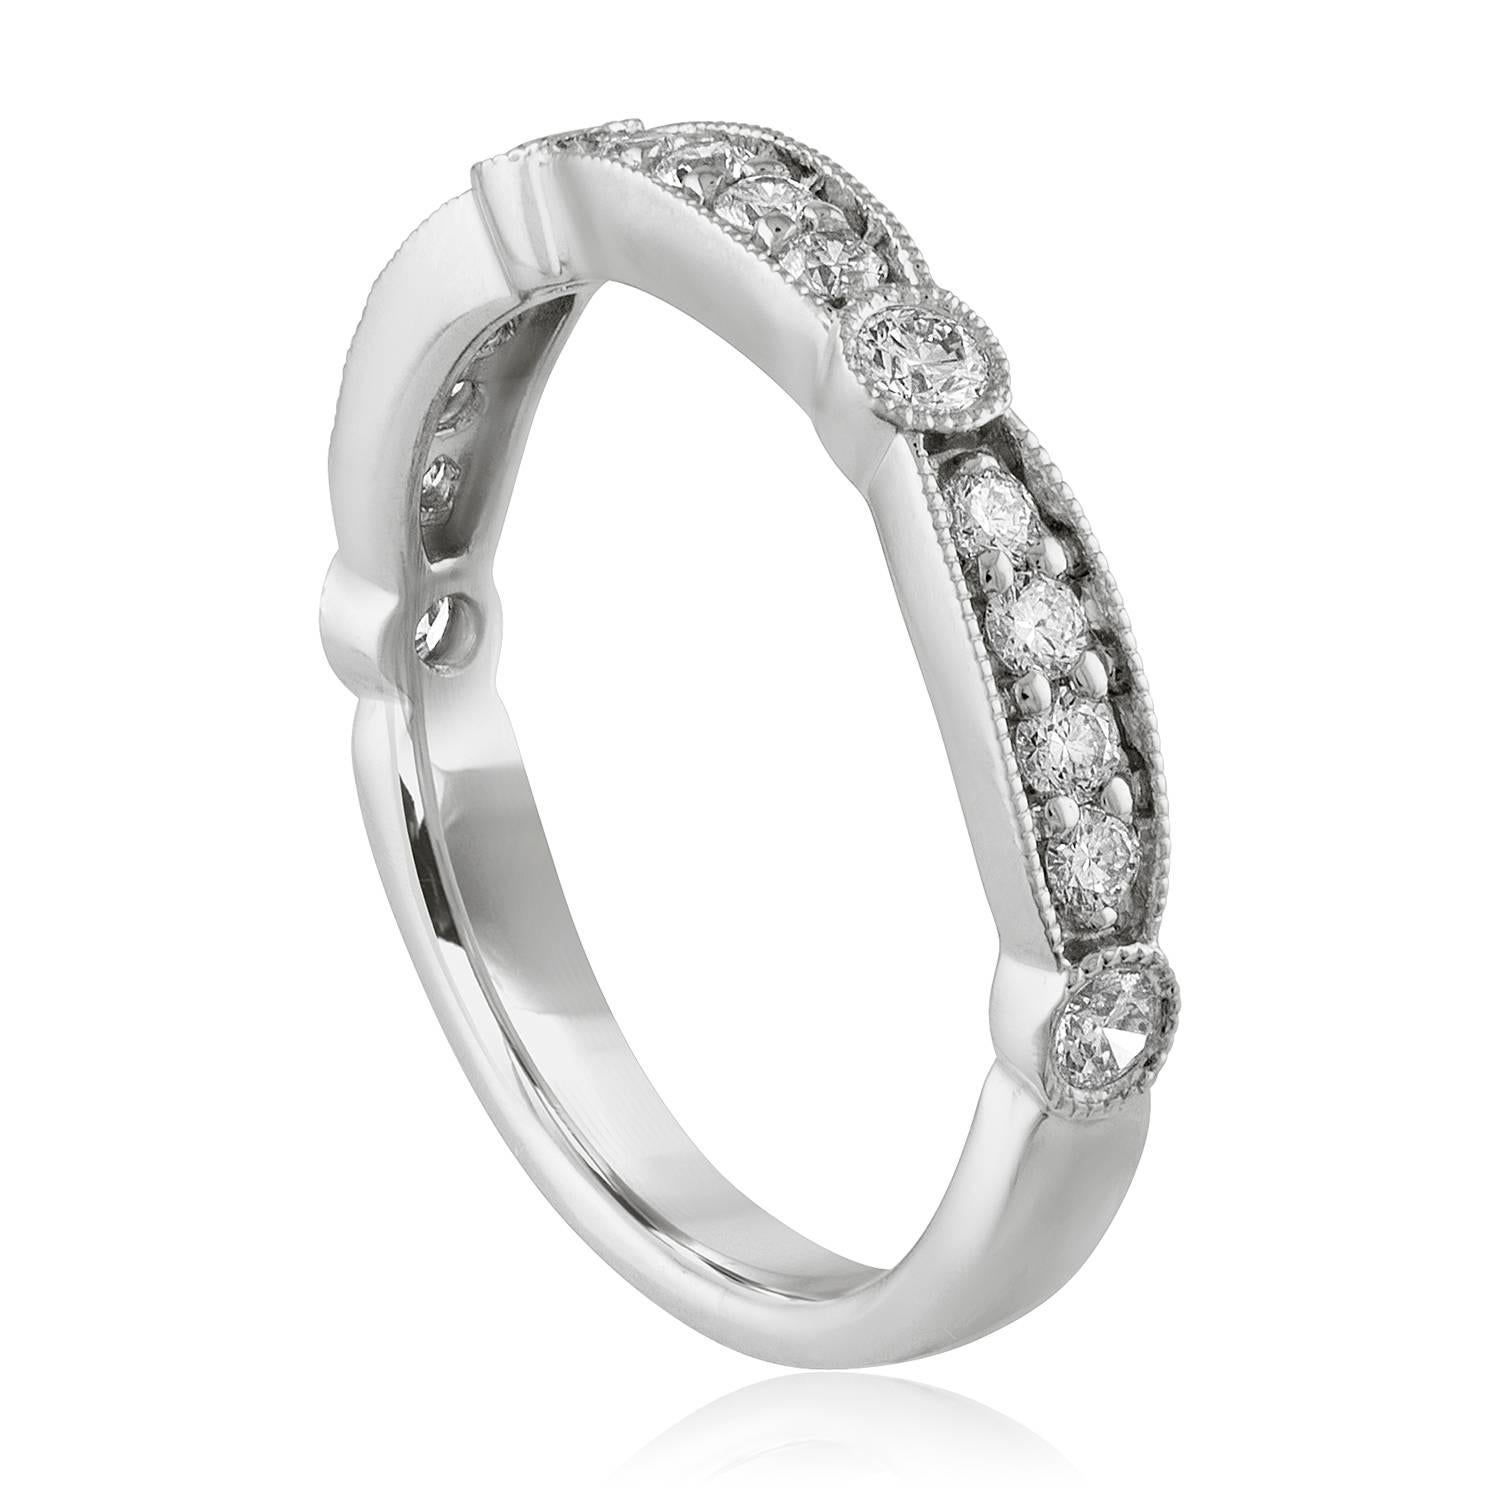 Beautiful Milgrain Diamond Wedding Band
The band is 14K White Gold
There are 0.40 Carats in Diamonds F VS/SI
The ring is a size 5.5, sizable
The ring weighs 2.4 grams